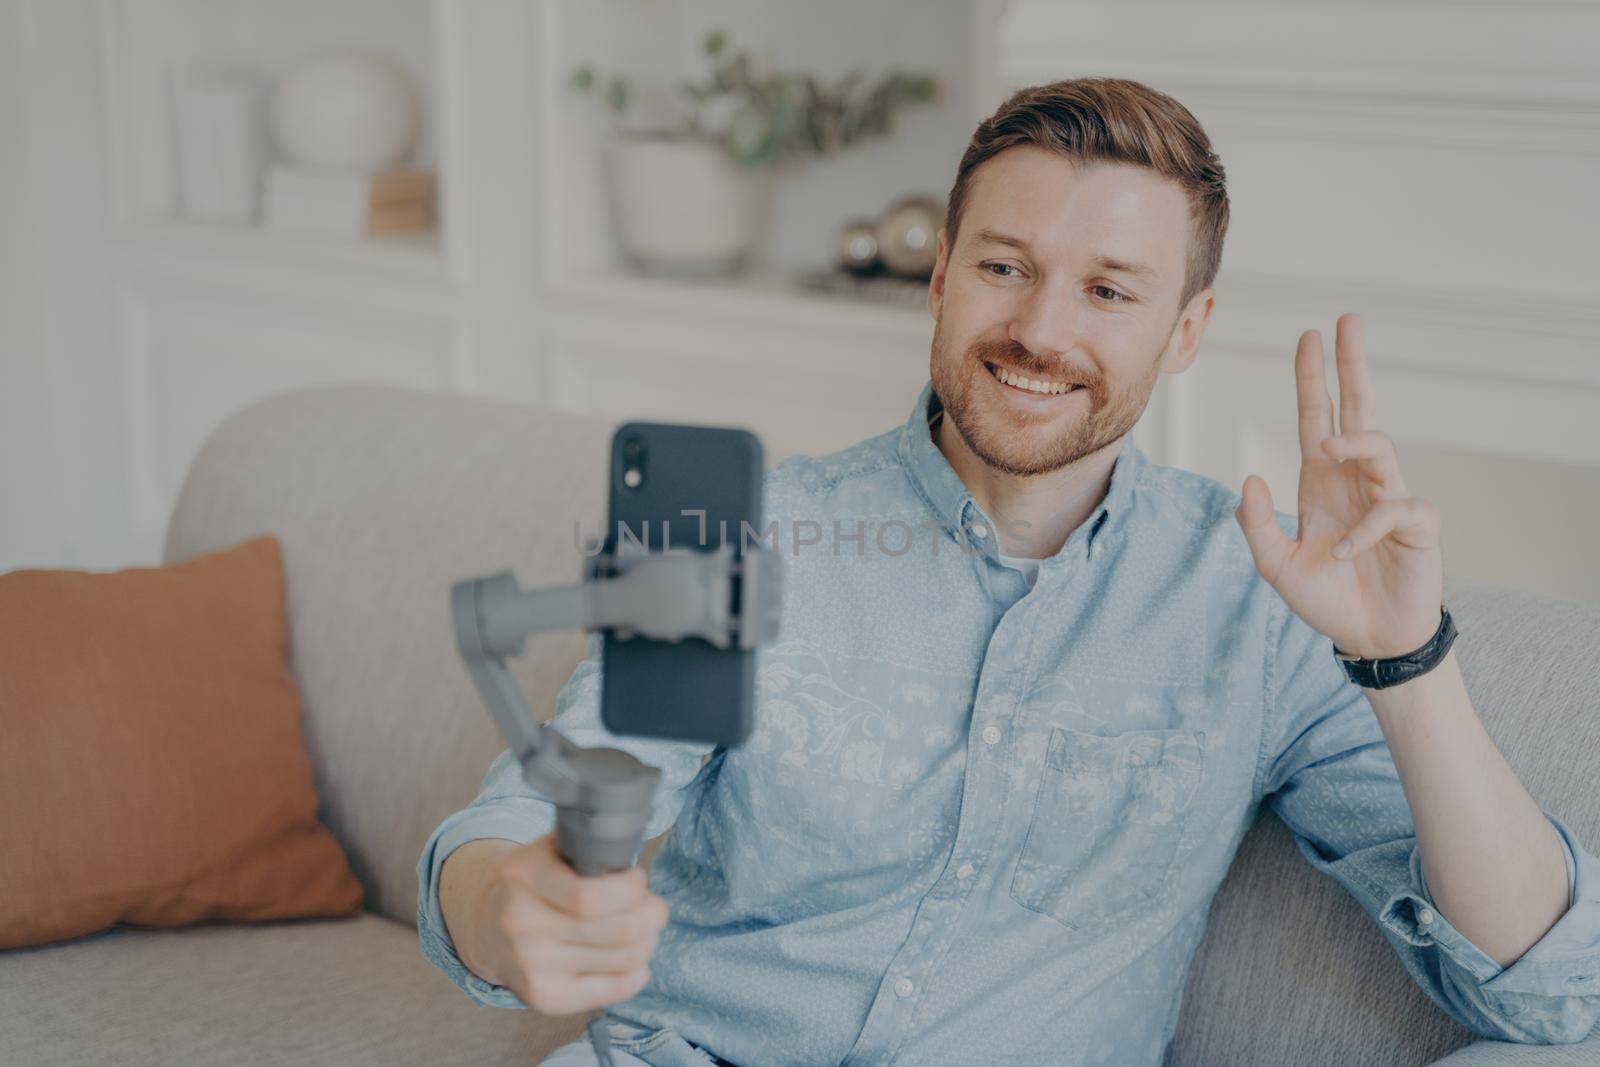 Young man talking with his friend through online video chat using telephone attached to gimbal, waving hello with hand while smiling, happy after not seeing each other for long time